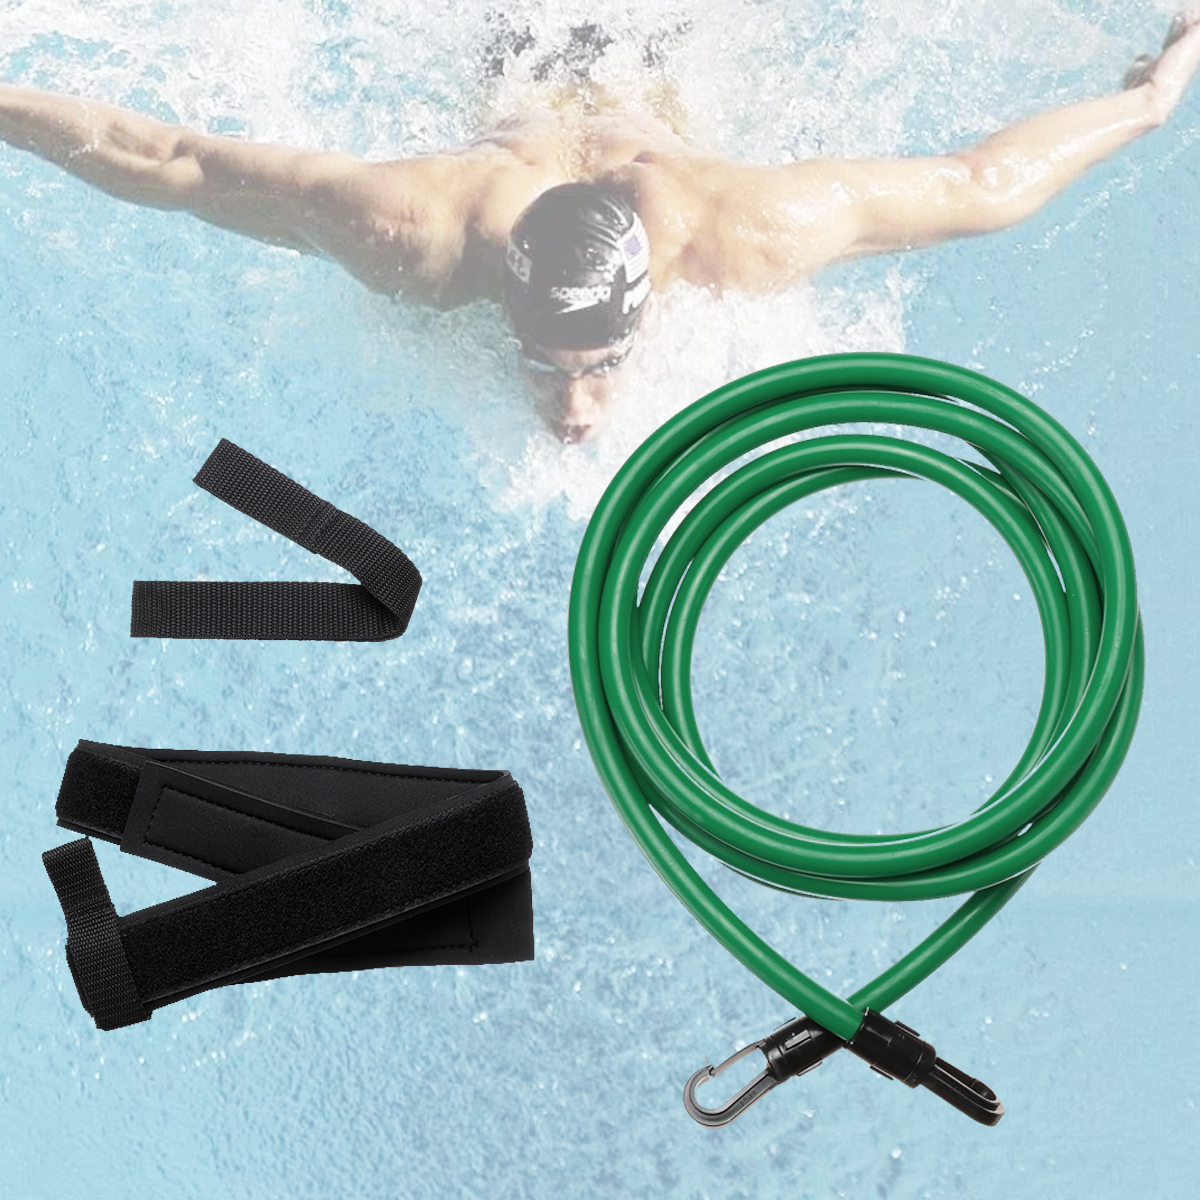 56x10x234m-Green-Swimming-Resistance-Bands-Swim-Training-Belts-Harness-Static-Swimming-Exercise-1700514-7